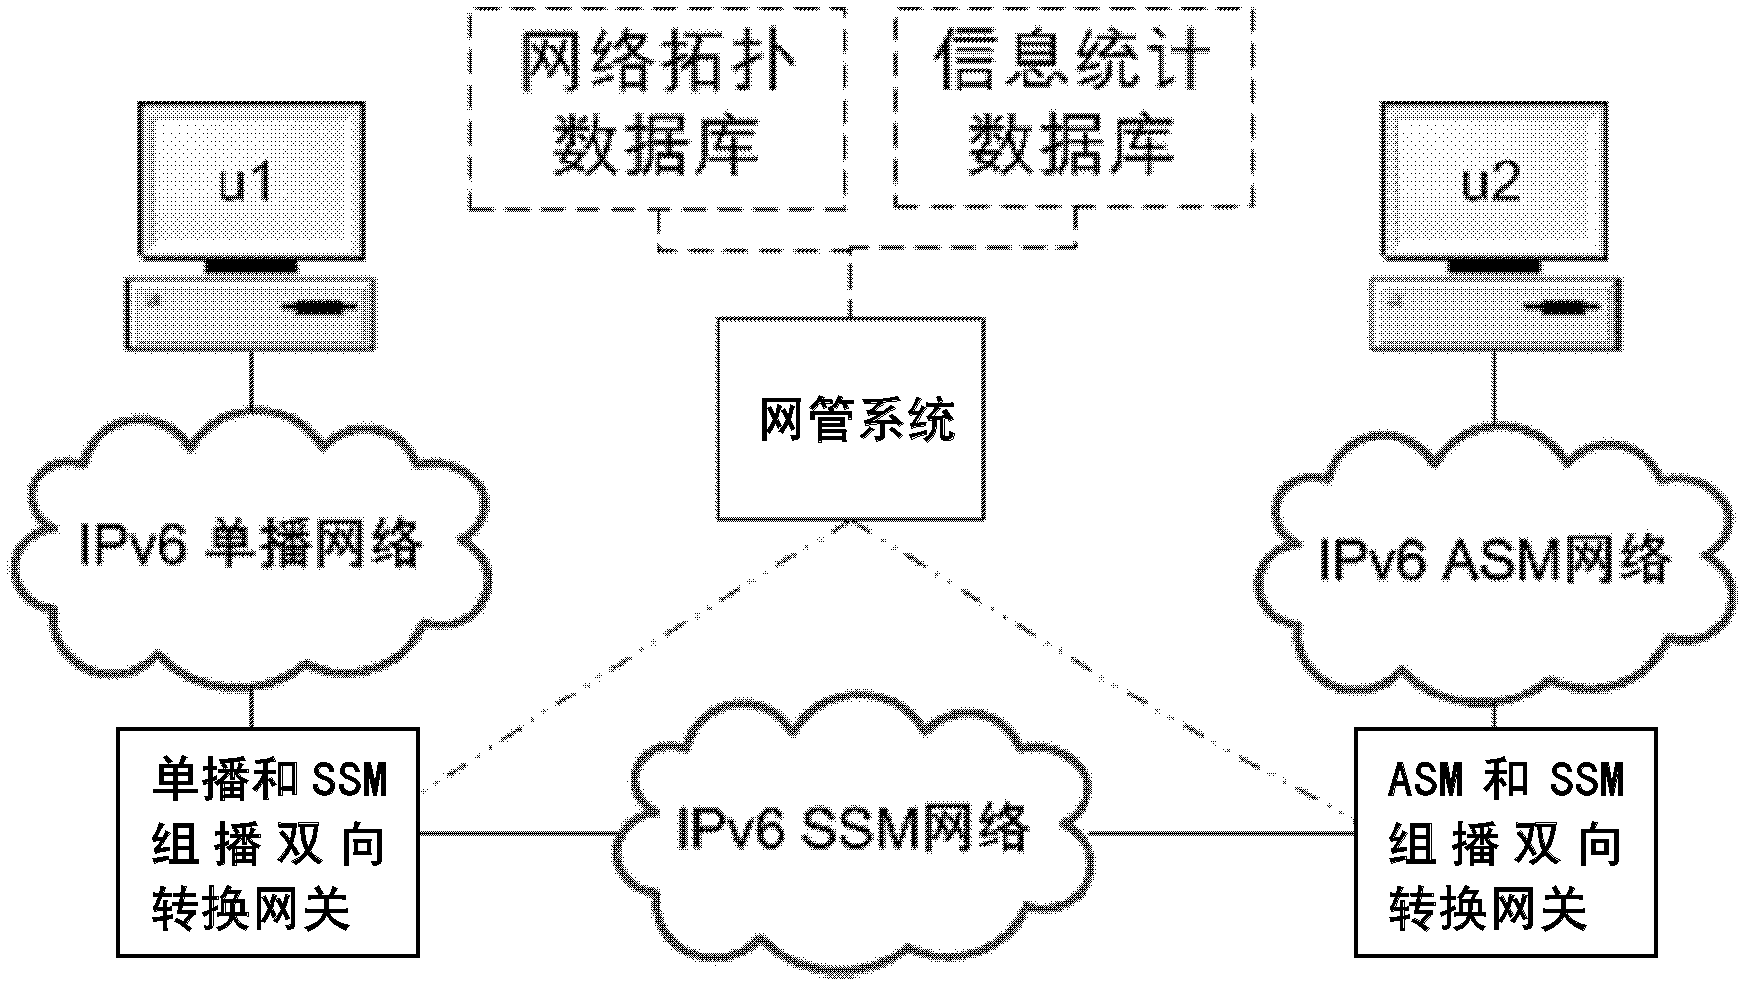 Network management system and method for controlled multicast system based on multicast conversion